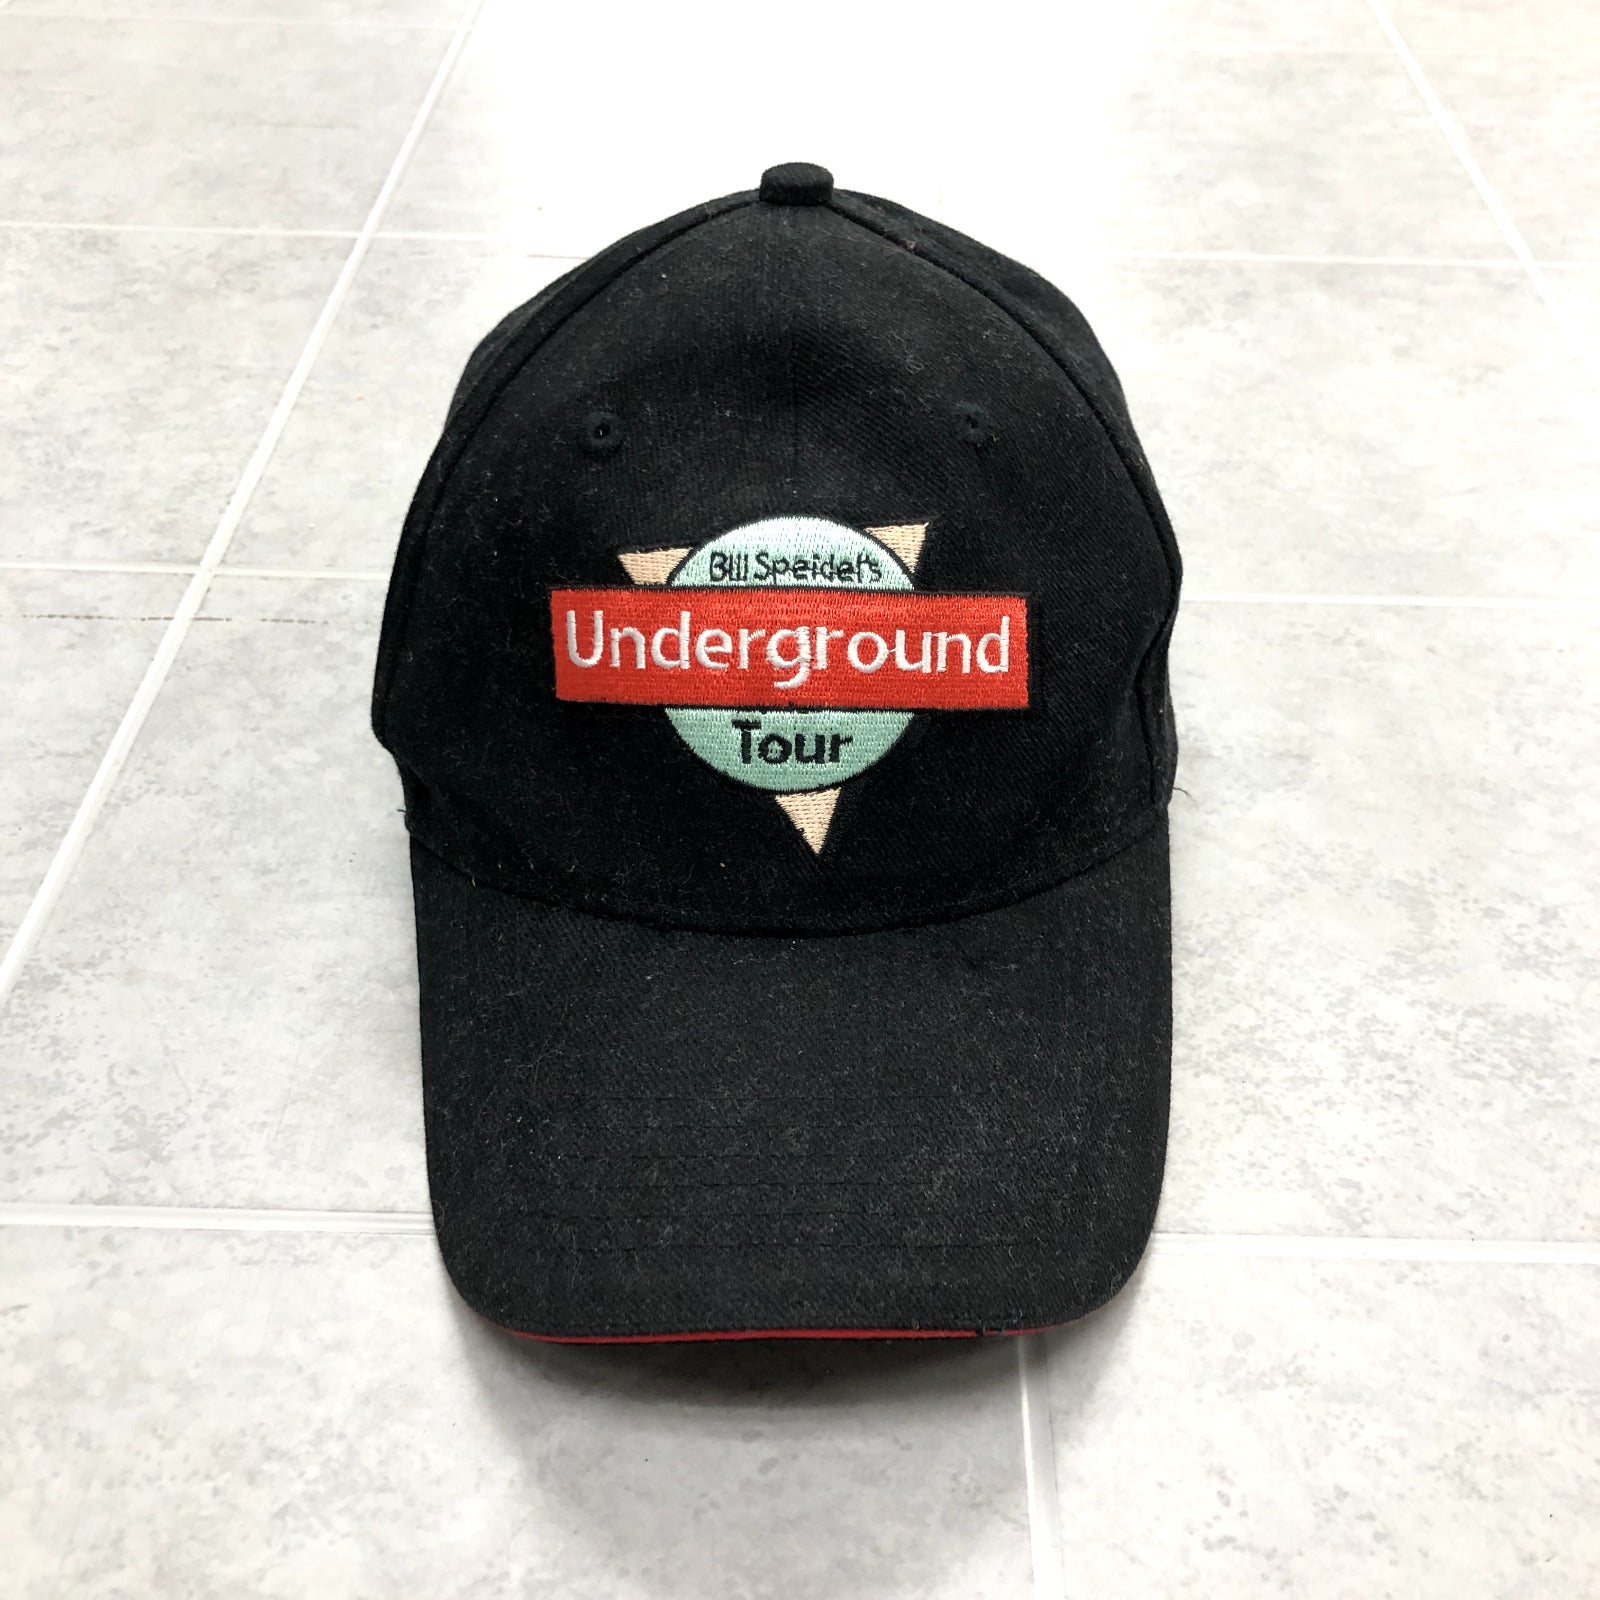 Hats Of America Black Cloth Strap Graphic Underground Tour Cap Adult One Size